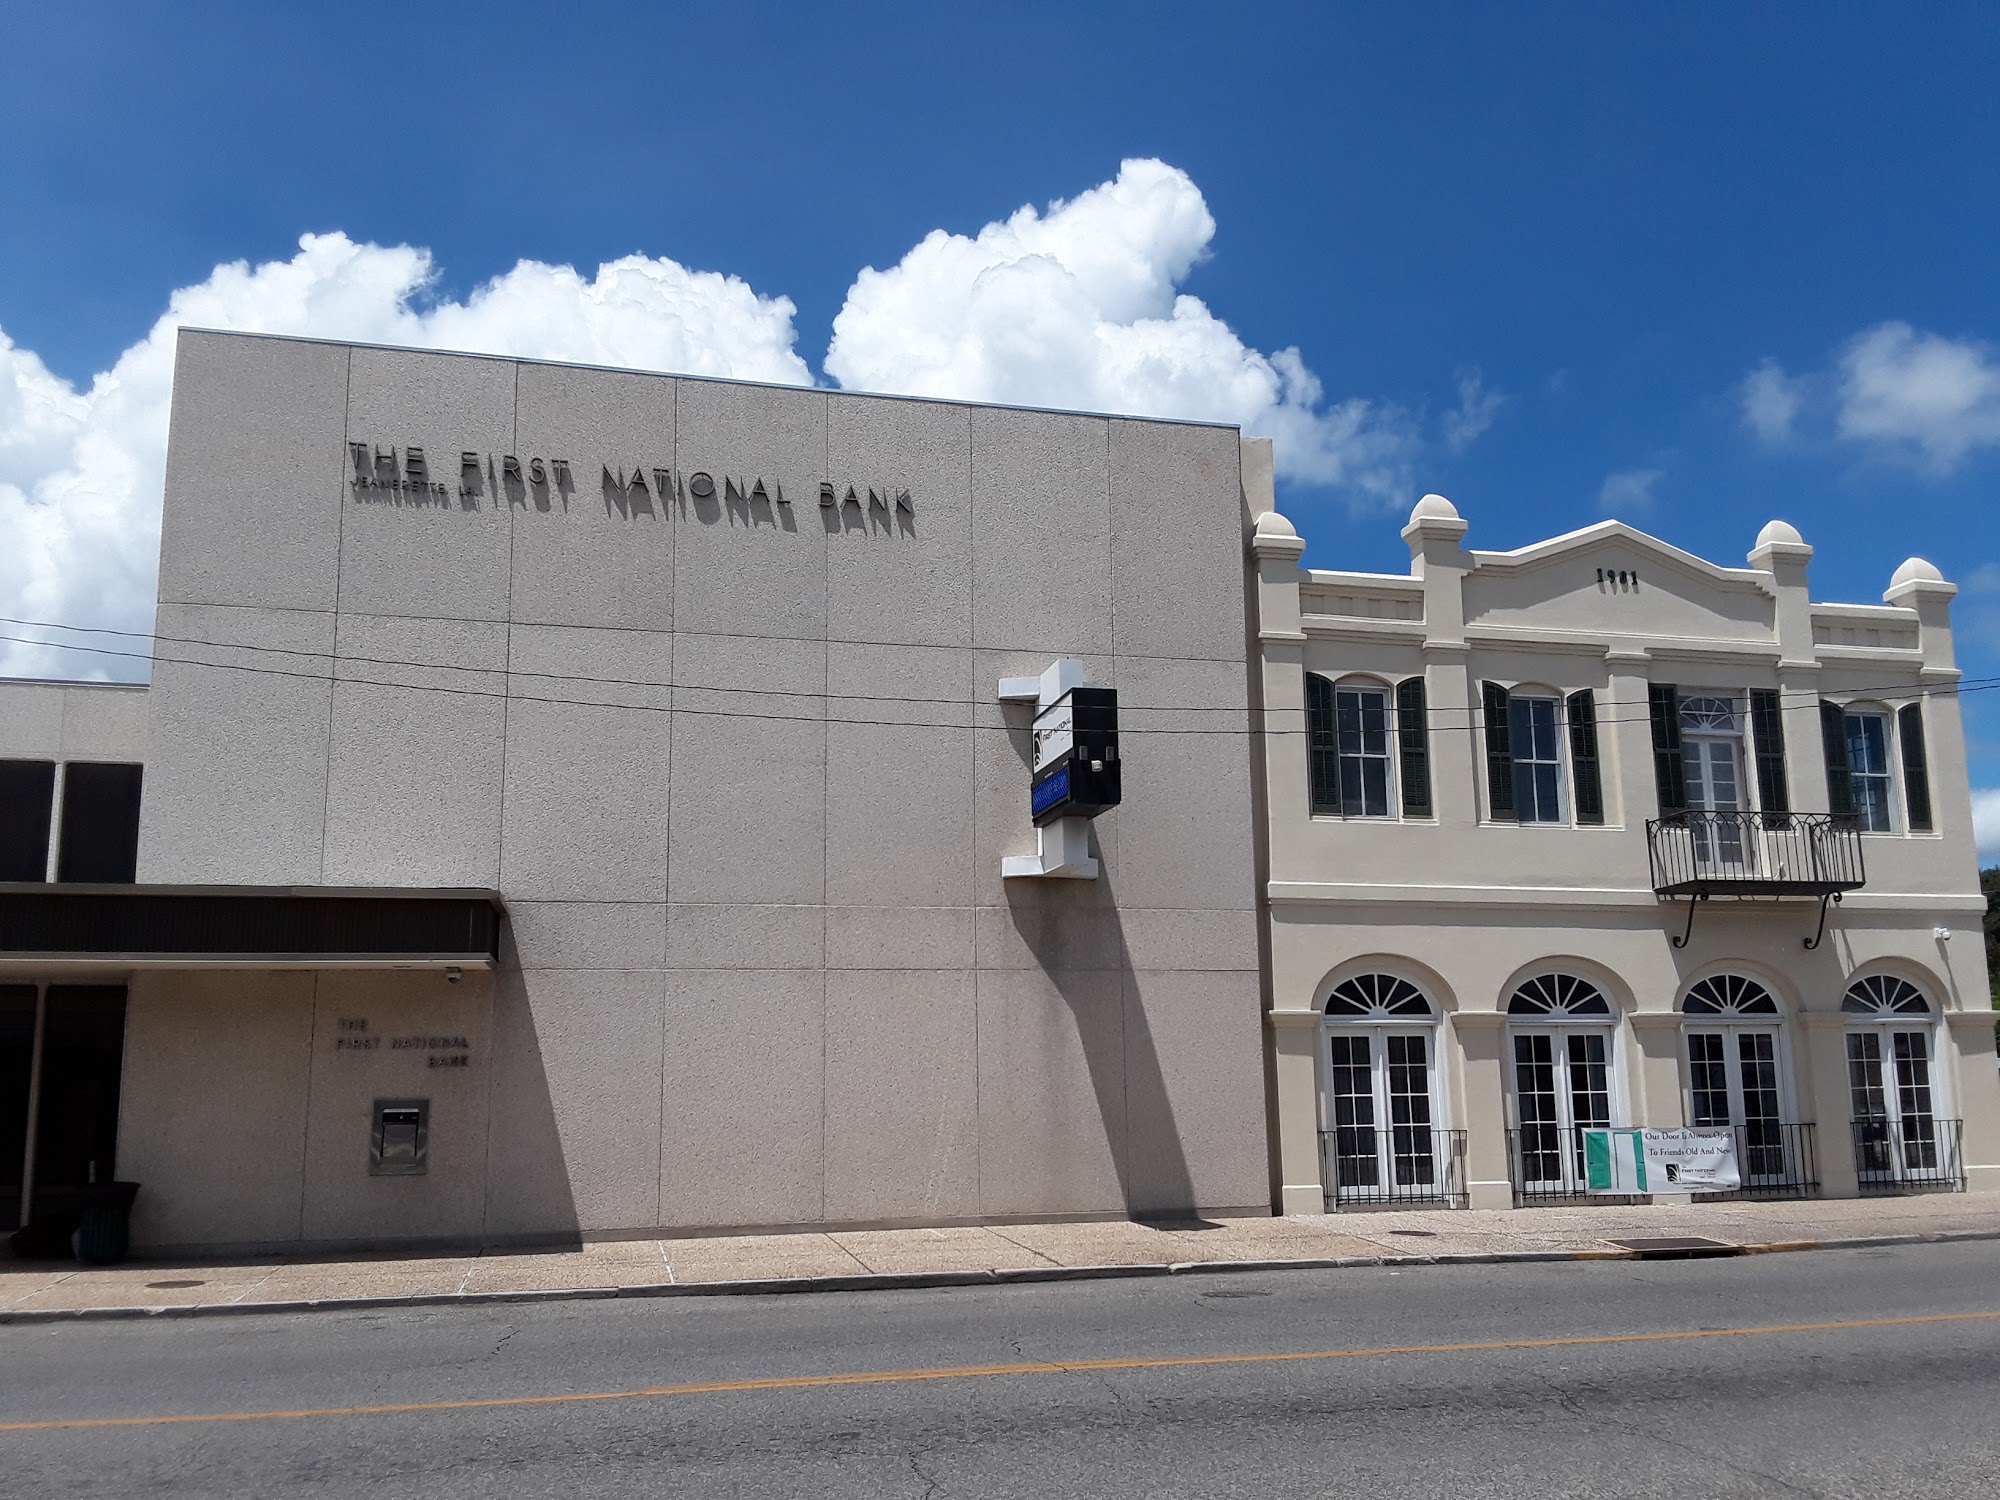 The First National Bank of Jeanerette